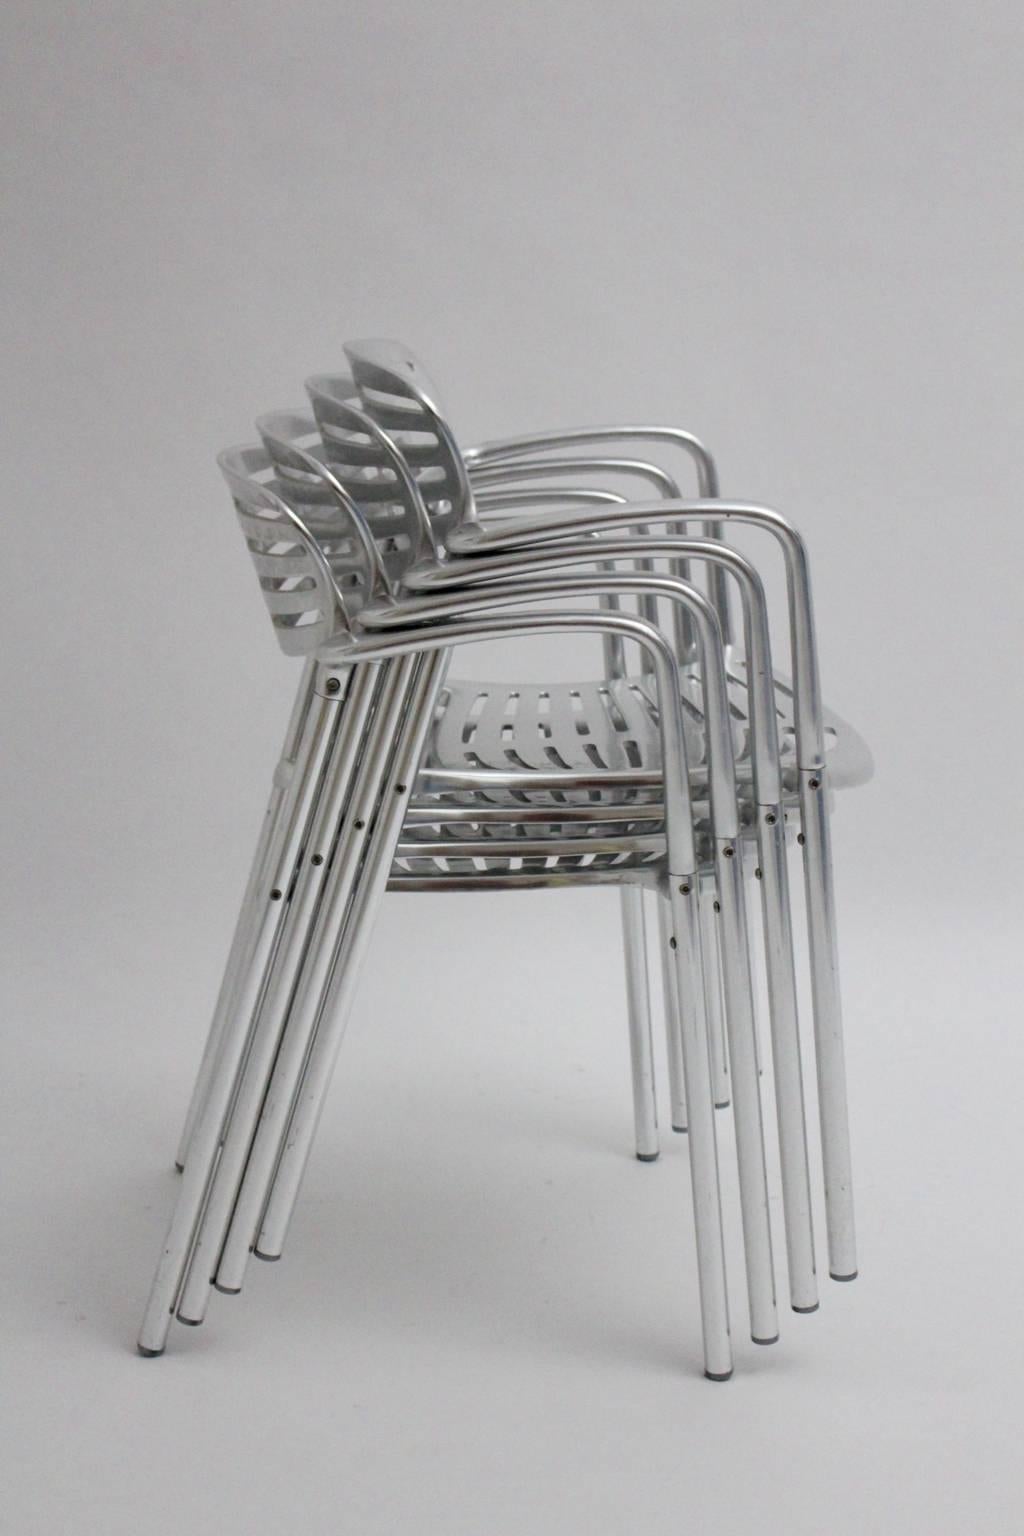 Modern Aluminum Stacking Chairs Garden Chairs Dining Chairs Jorge Pensi 1980s In Good Condition For Sale In Vienna, AT